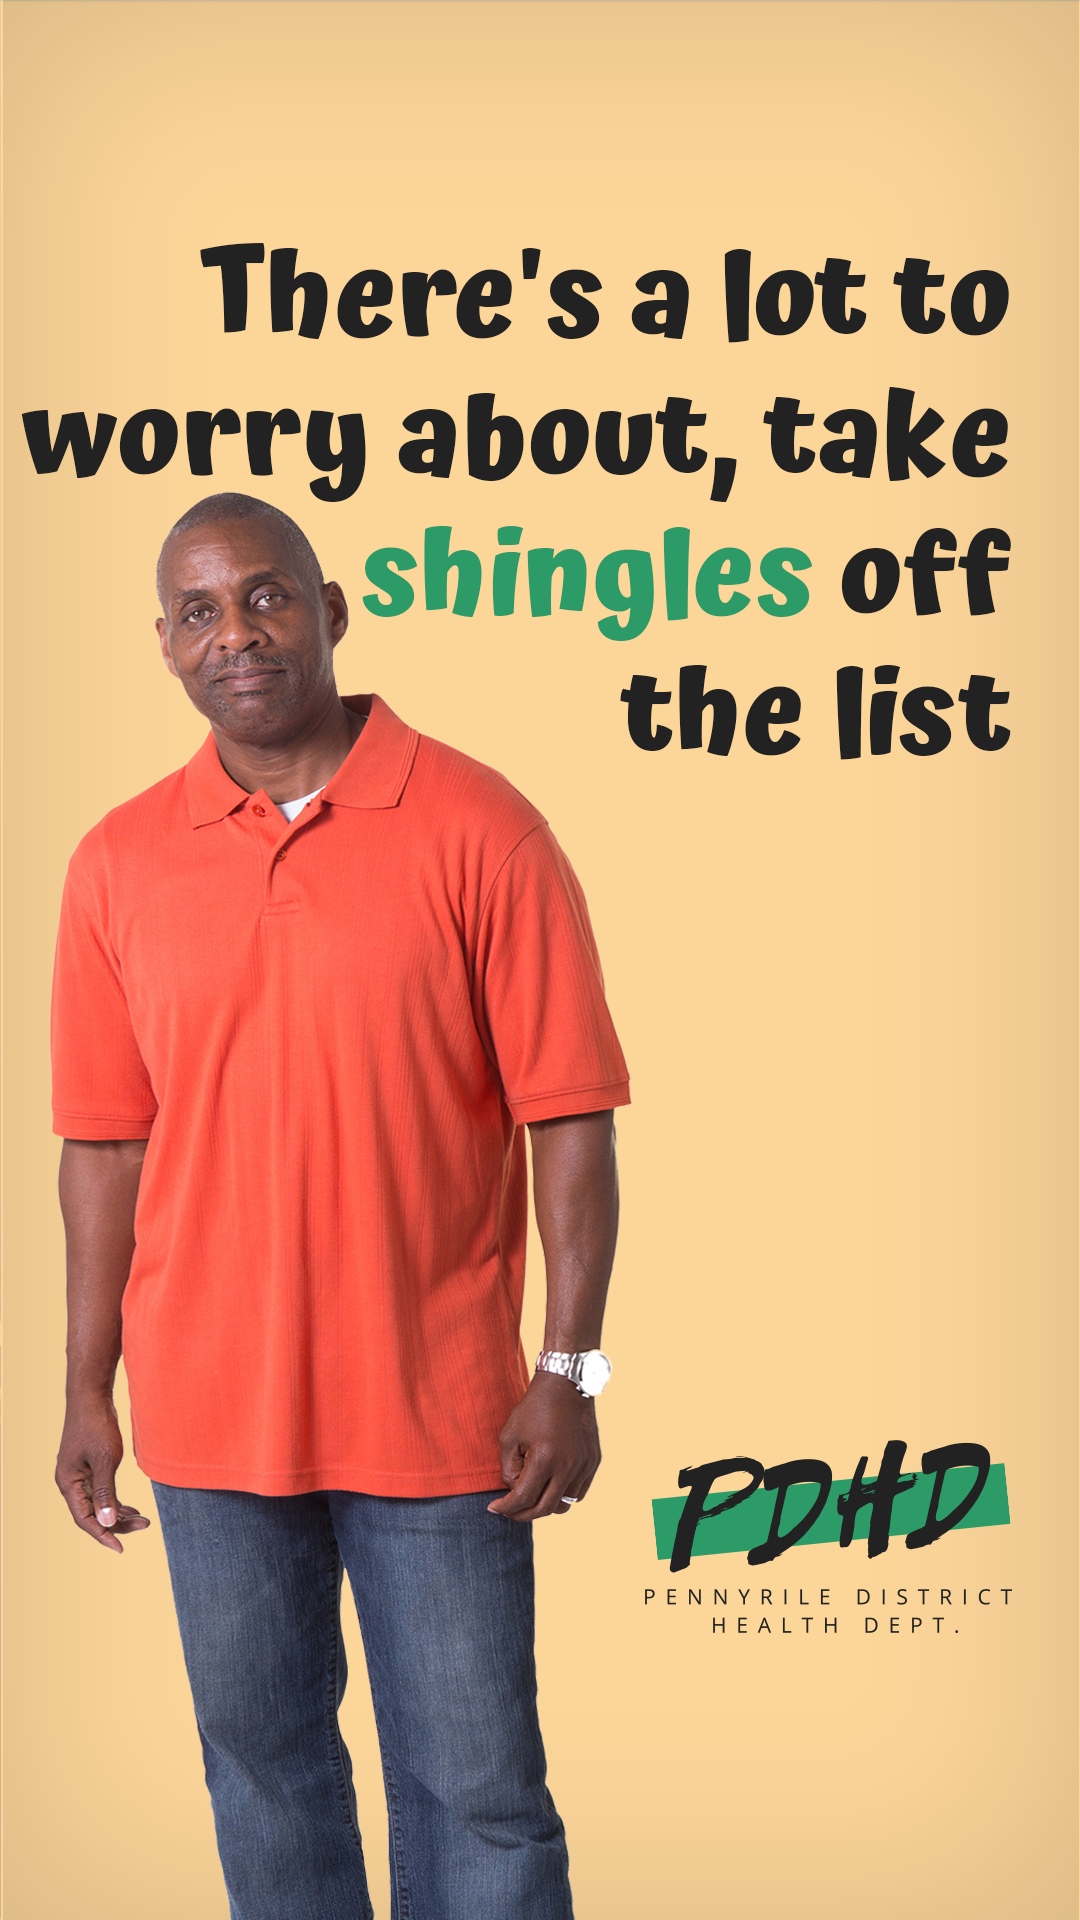 There's a lot to worry about, take shingles off the list